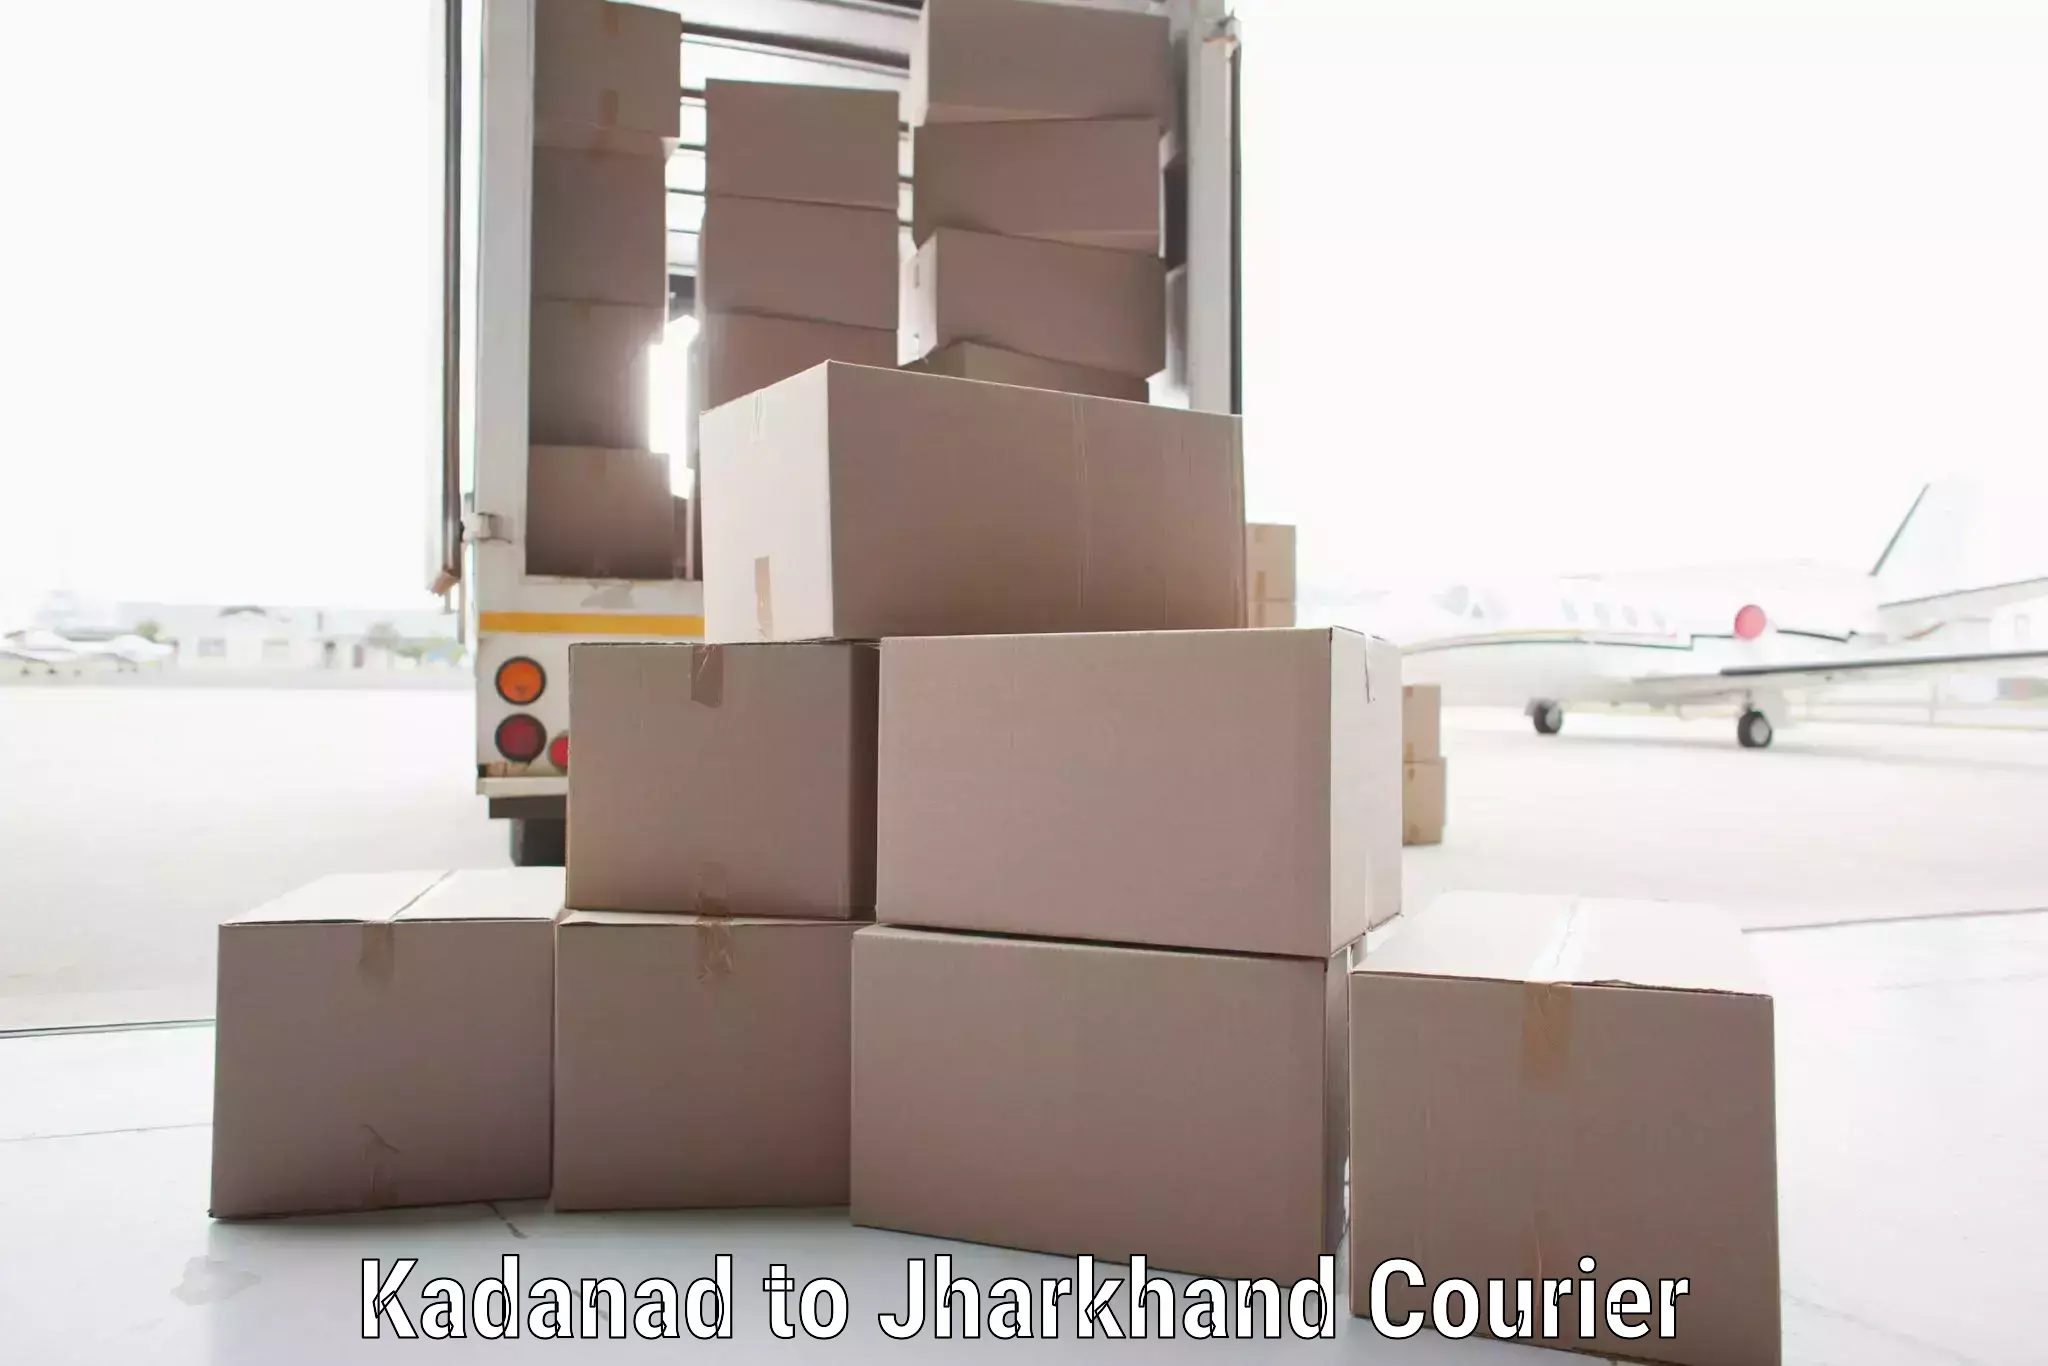 Express package handling Kadanad to Chatra